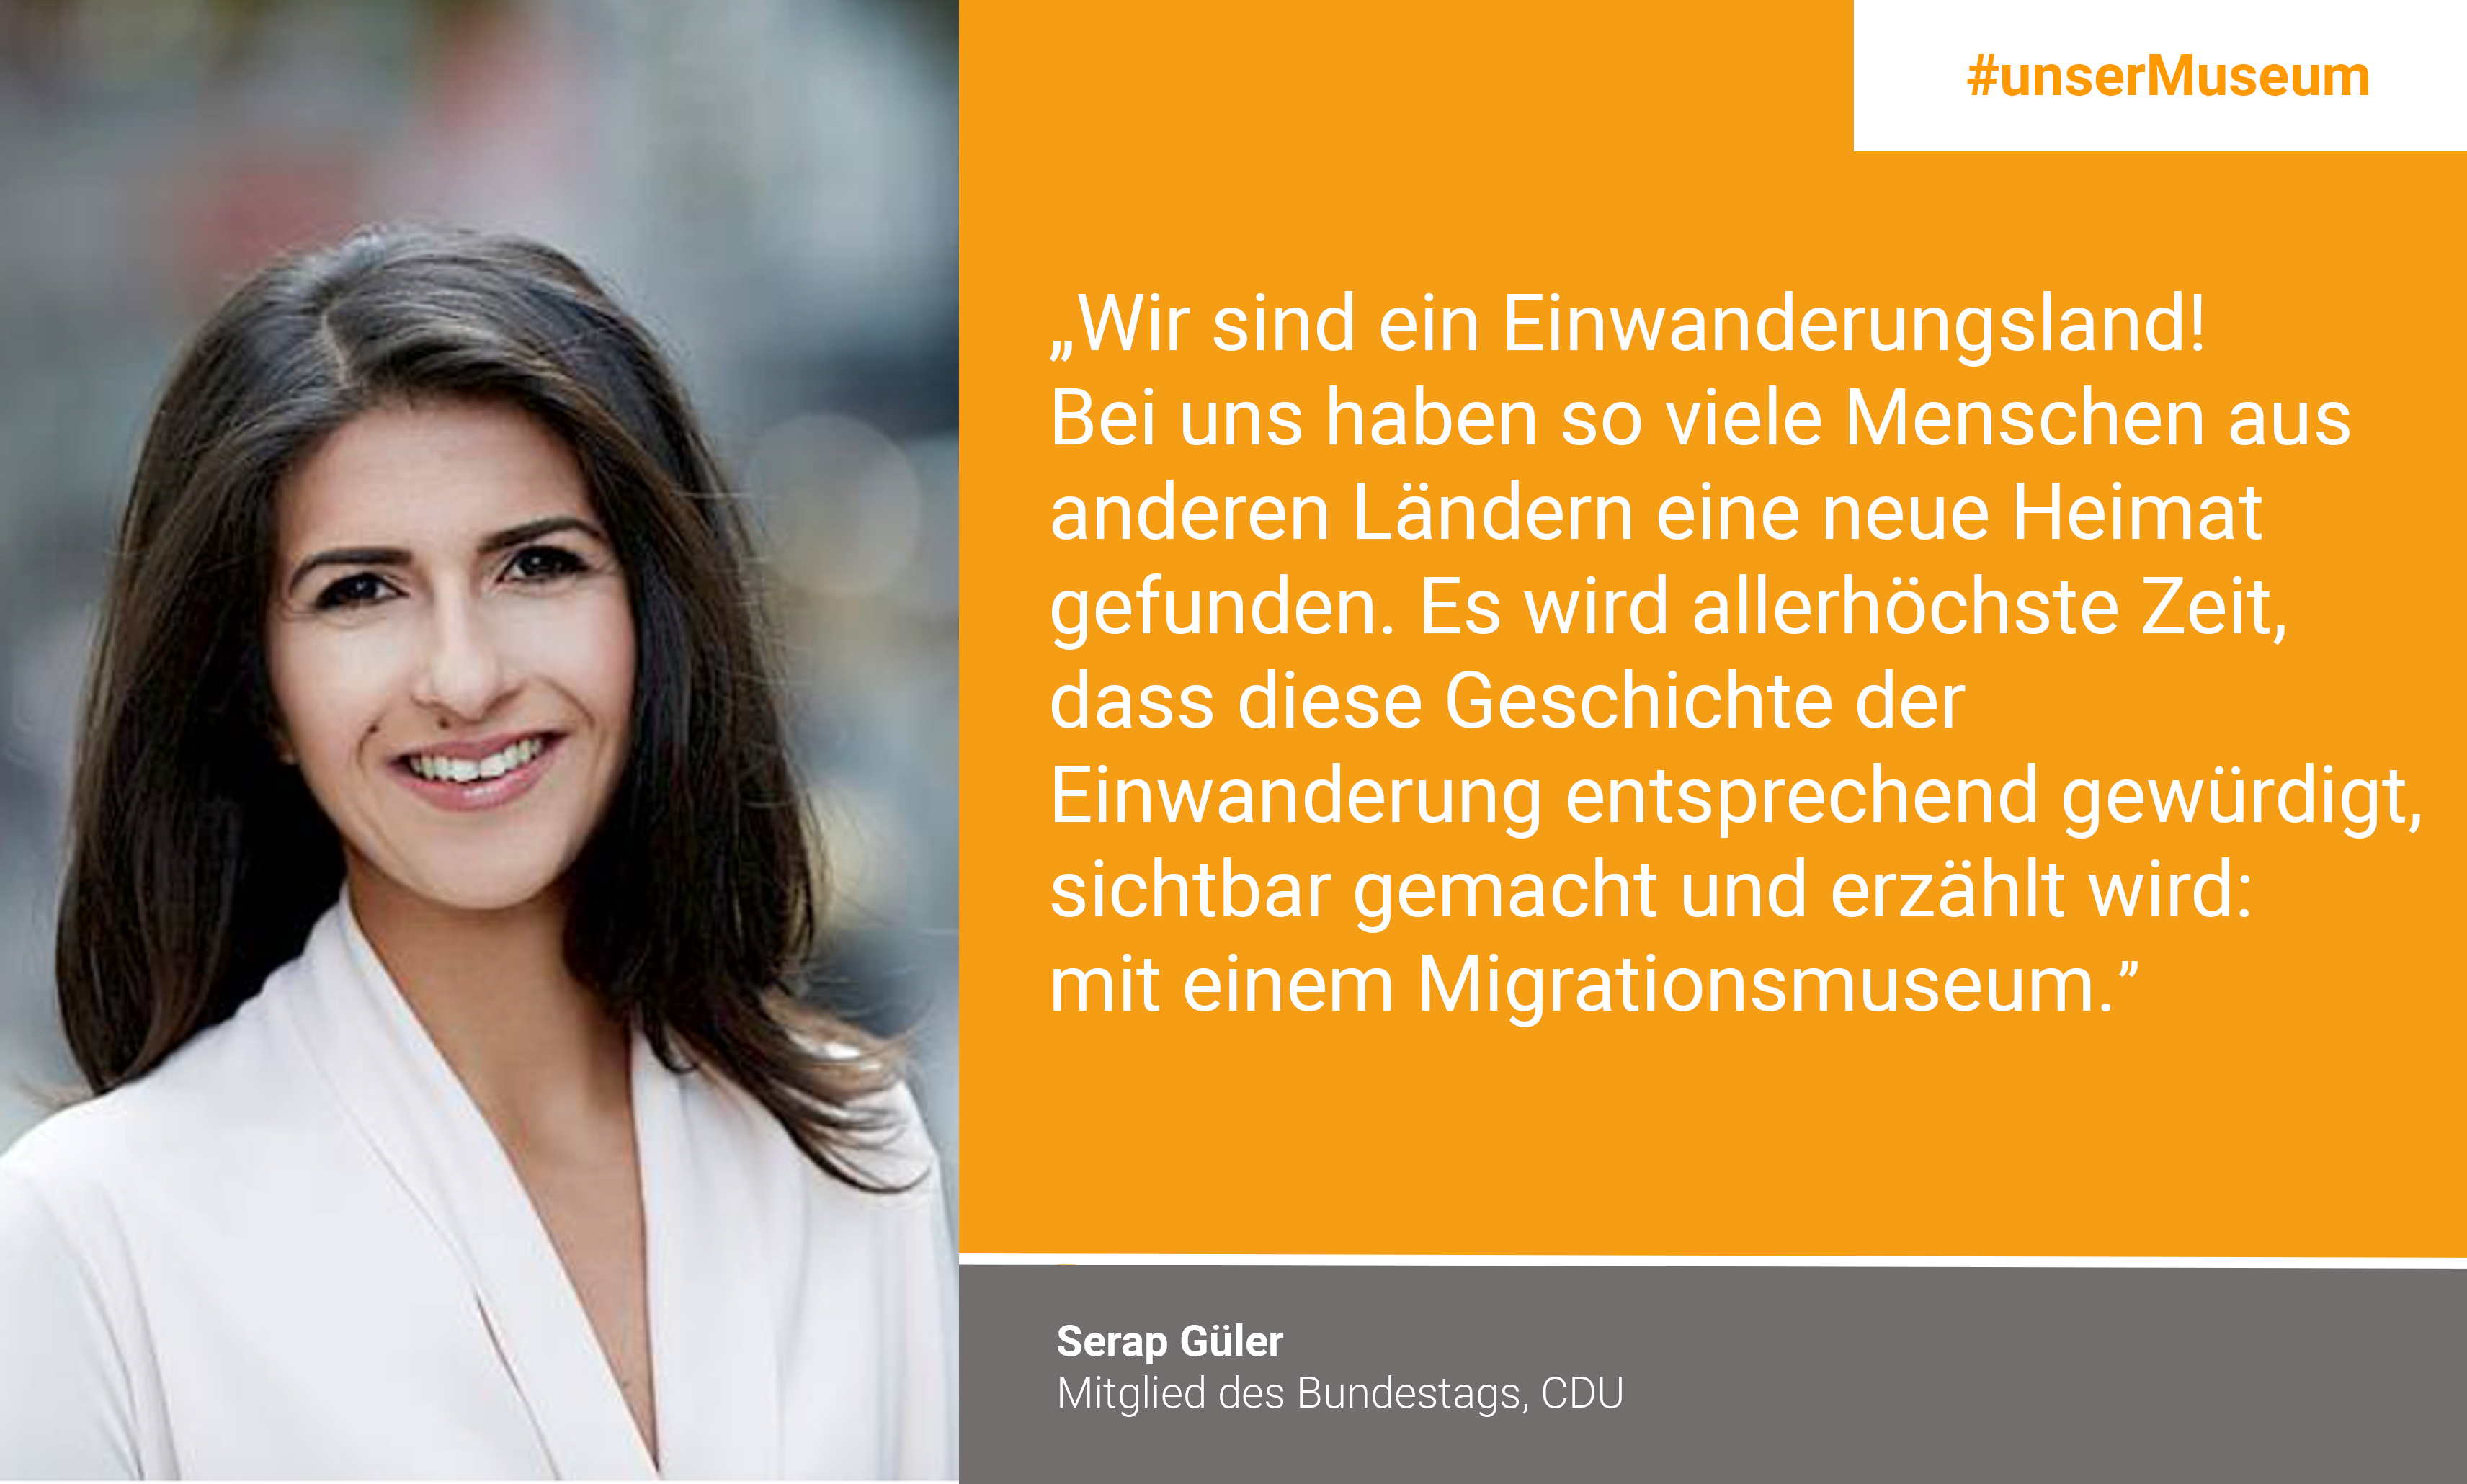 Serap Güler, Member of German parliament (CDU): "We are a country of immigration! So many people from other countries have found a new home here. It is high time for this history of immigration to be appreciated, made visible and told: through a central museum of migration."